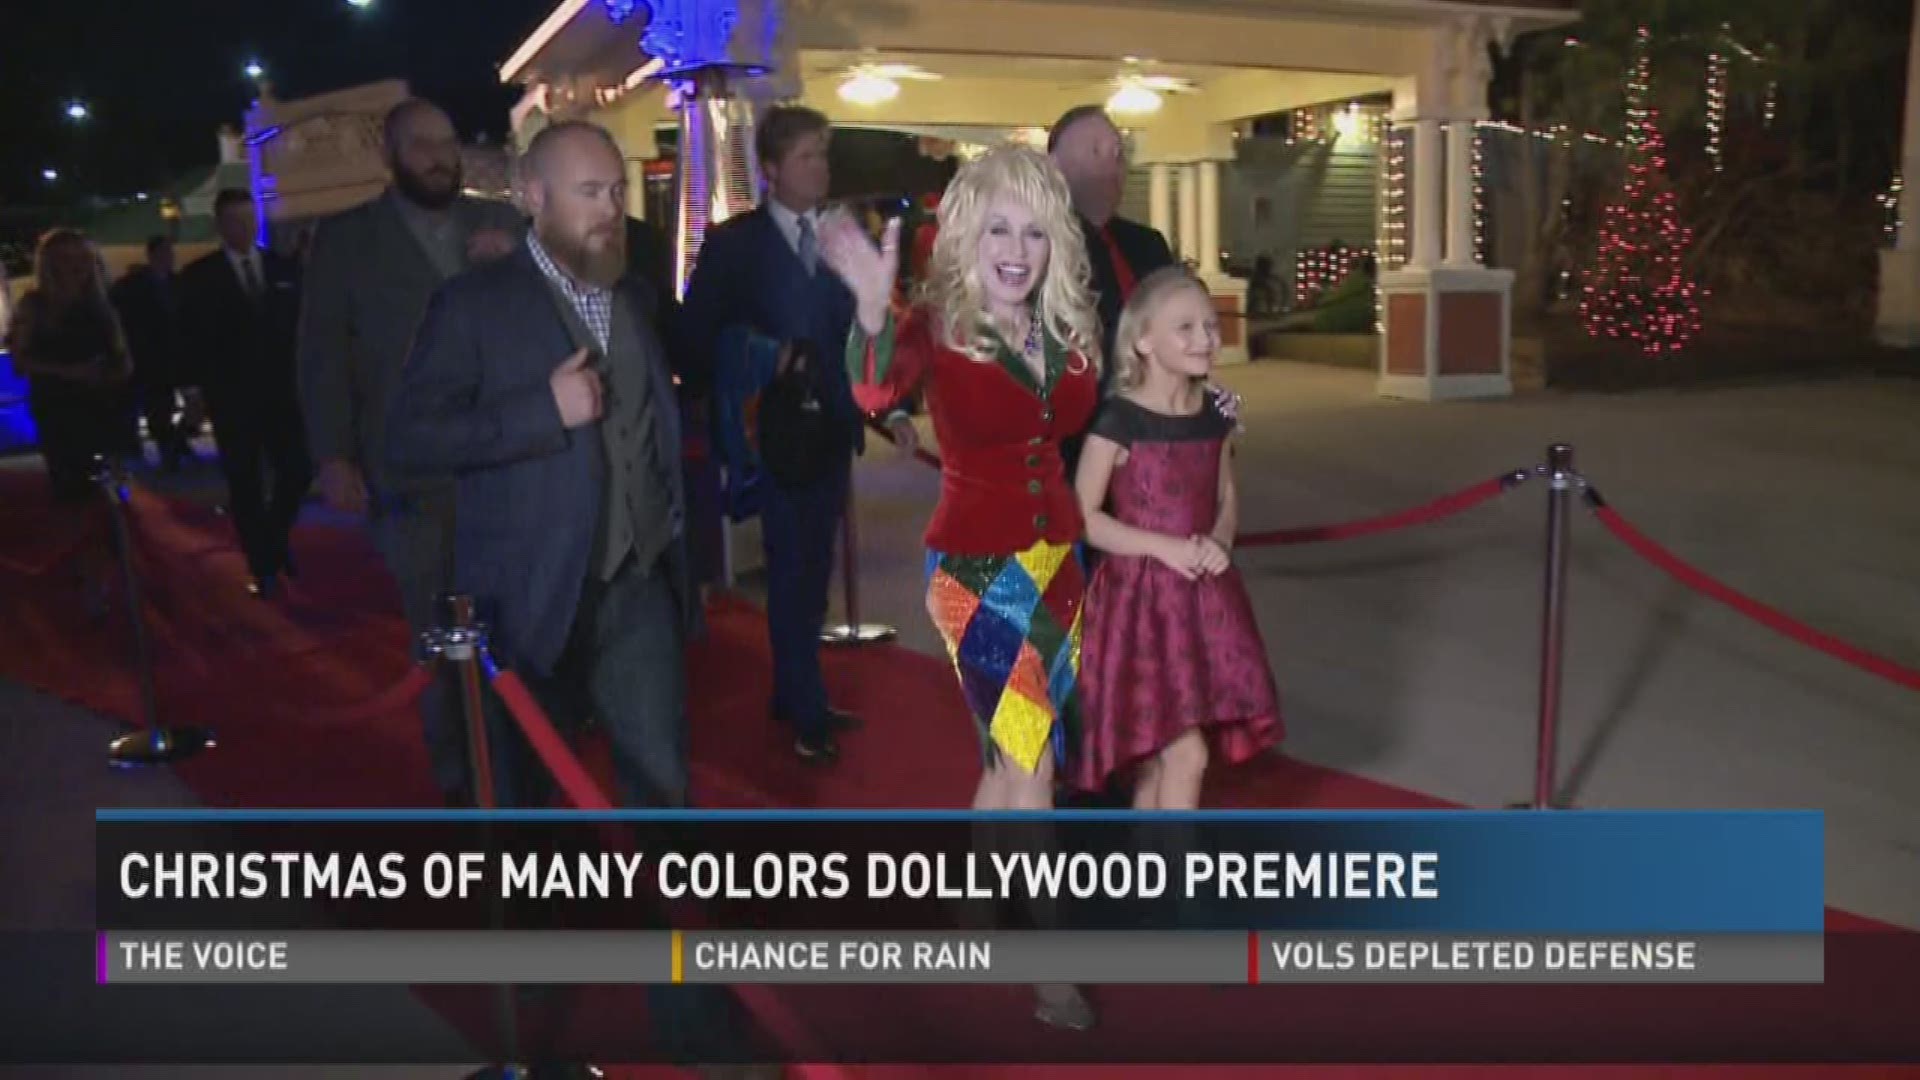 Nov. 22, 2016: The red carpet rolled out  at Dollywood as Dolly Parton, her family and cast members gathered together to see their hard work come to life in the new movie "Christmas of Many Colors."